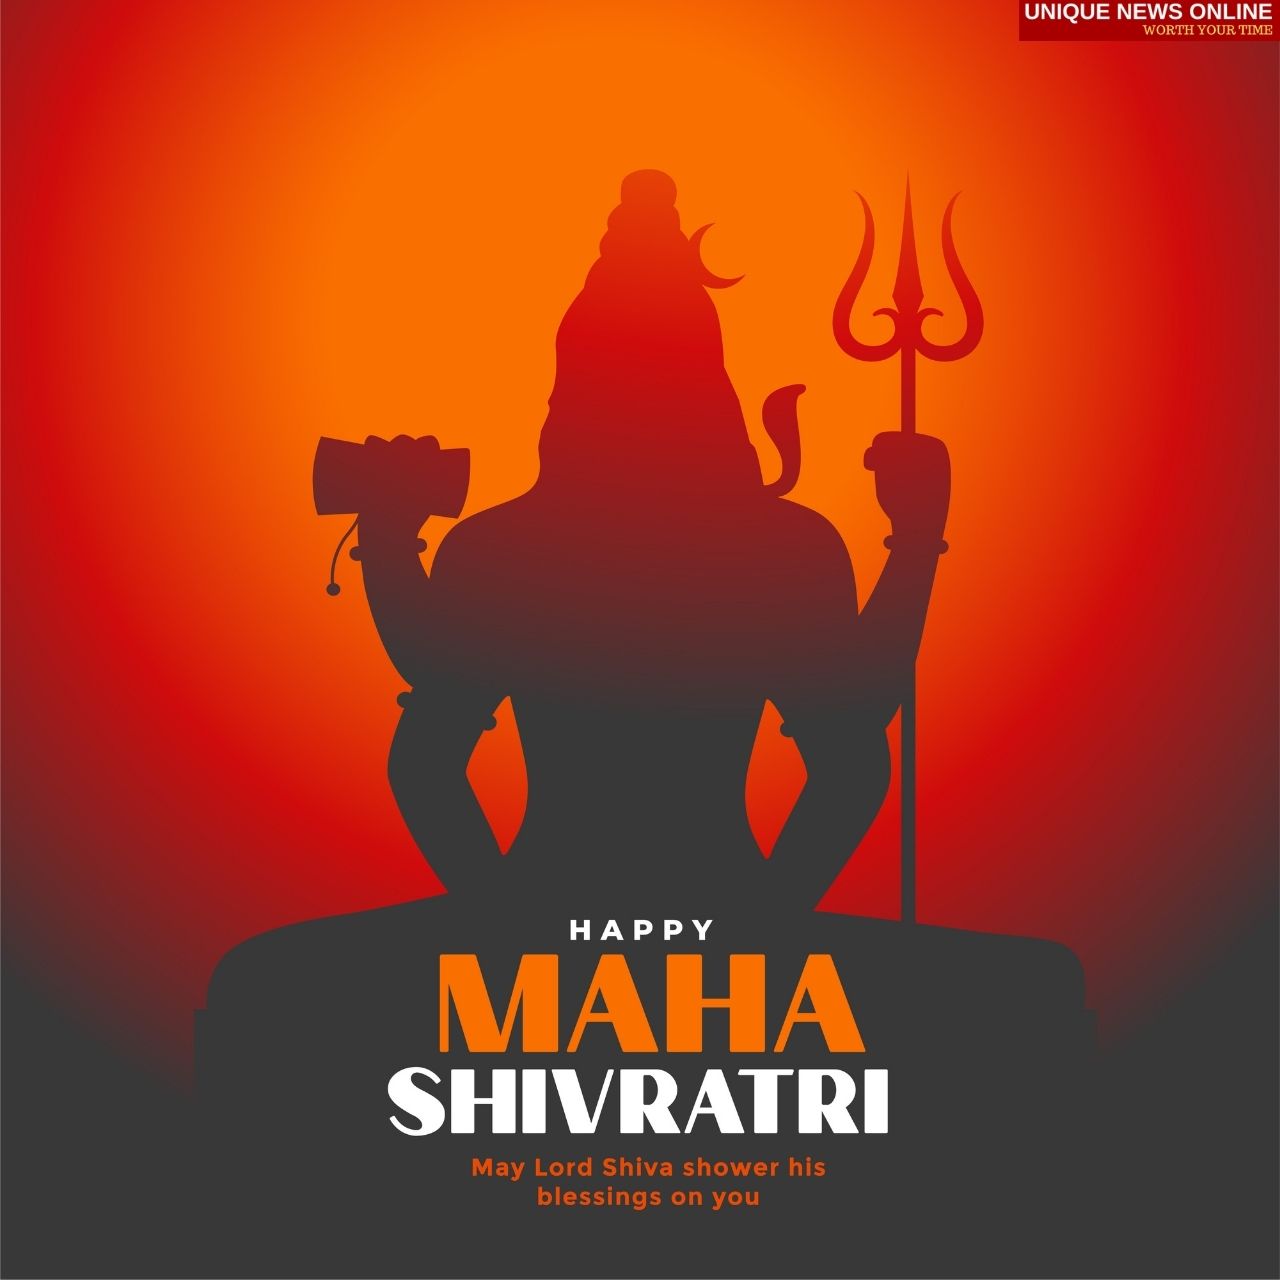 Happy Maha Shivratri 2022 Instagram Captions, Facebook Greetings, WhatsApp Images, Twitter Posts, DP, Wallpaper to greet your loved ones